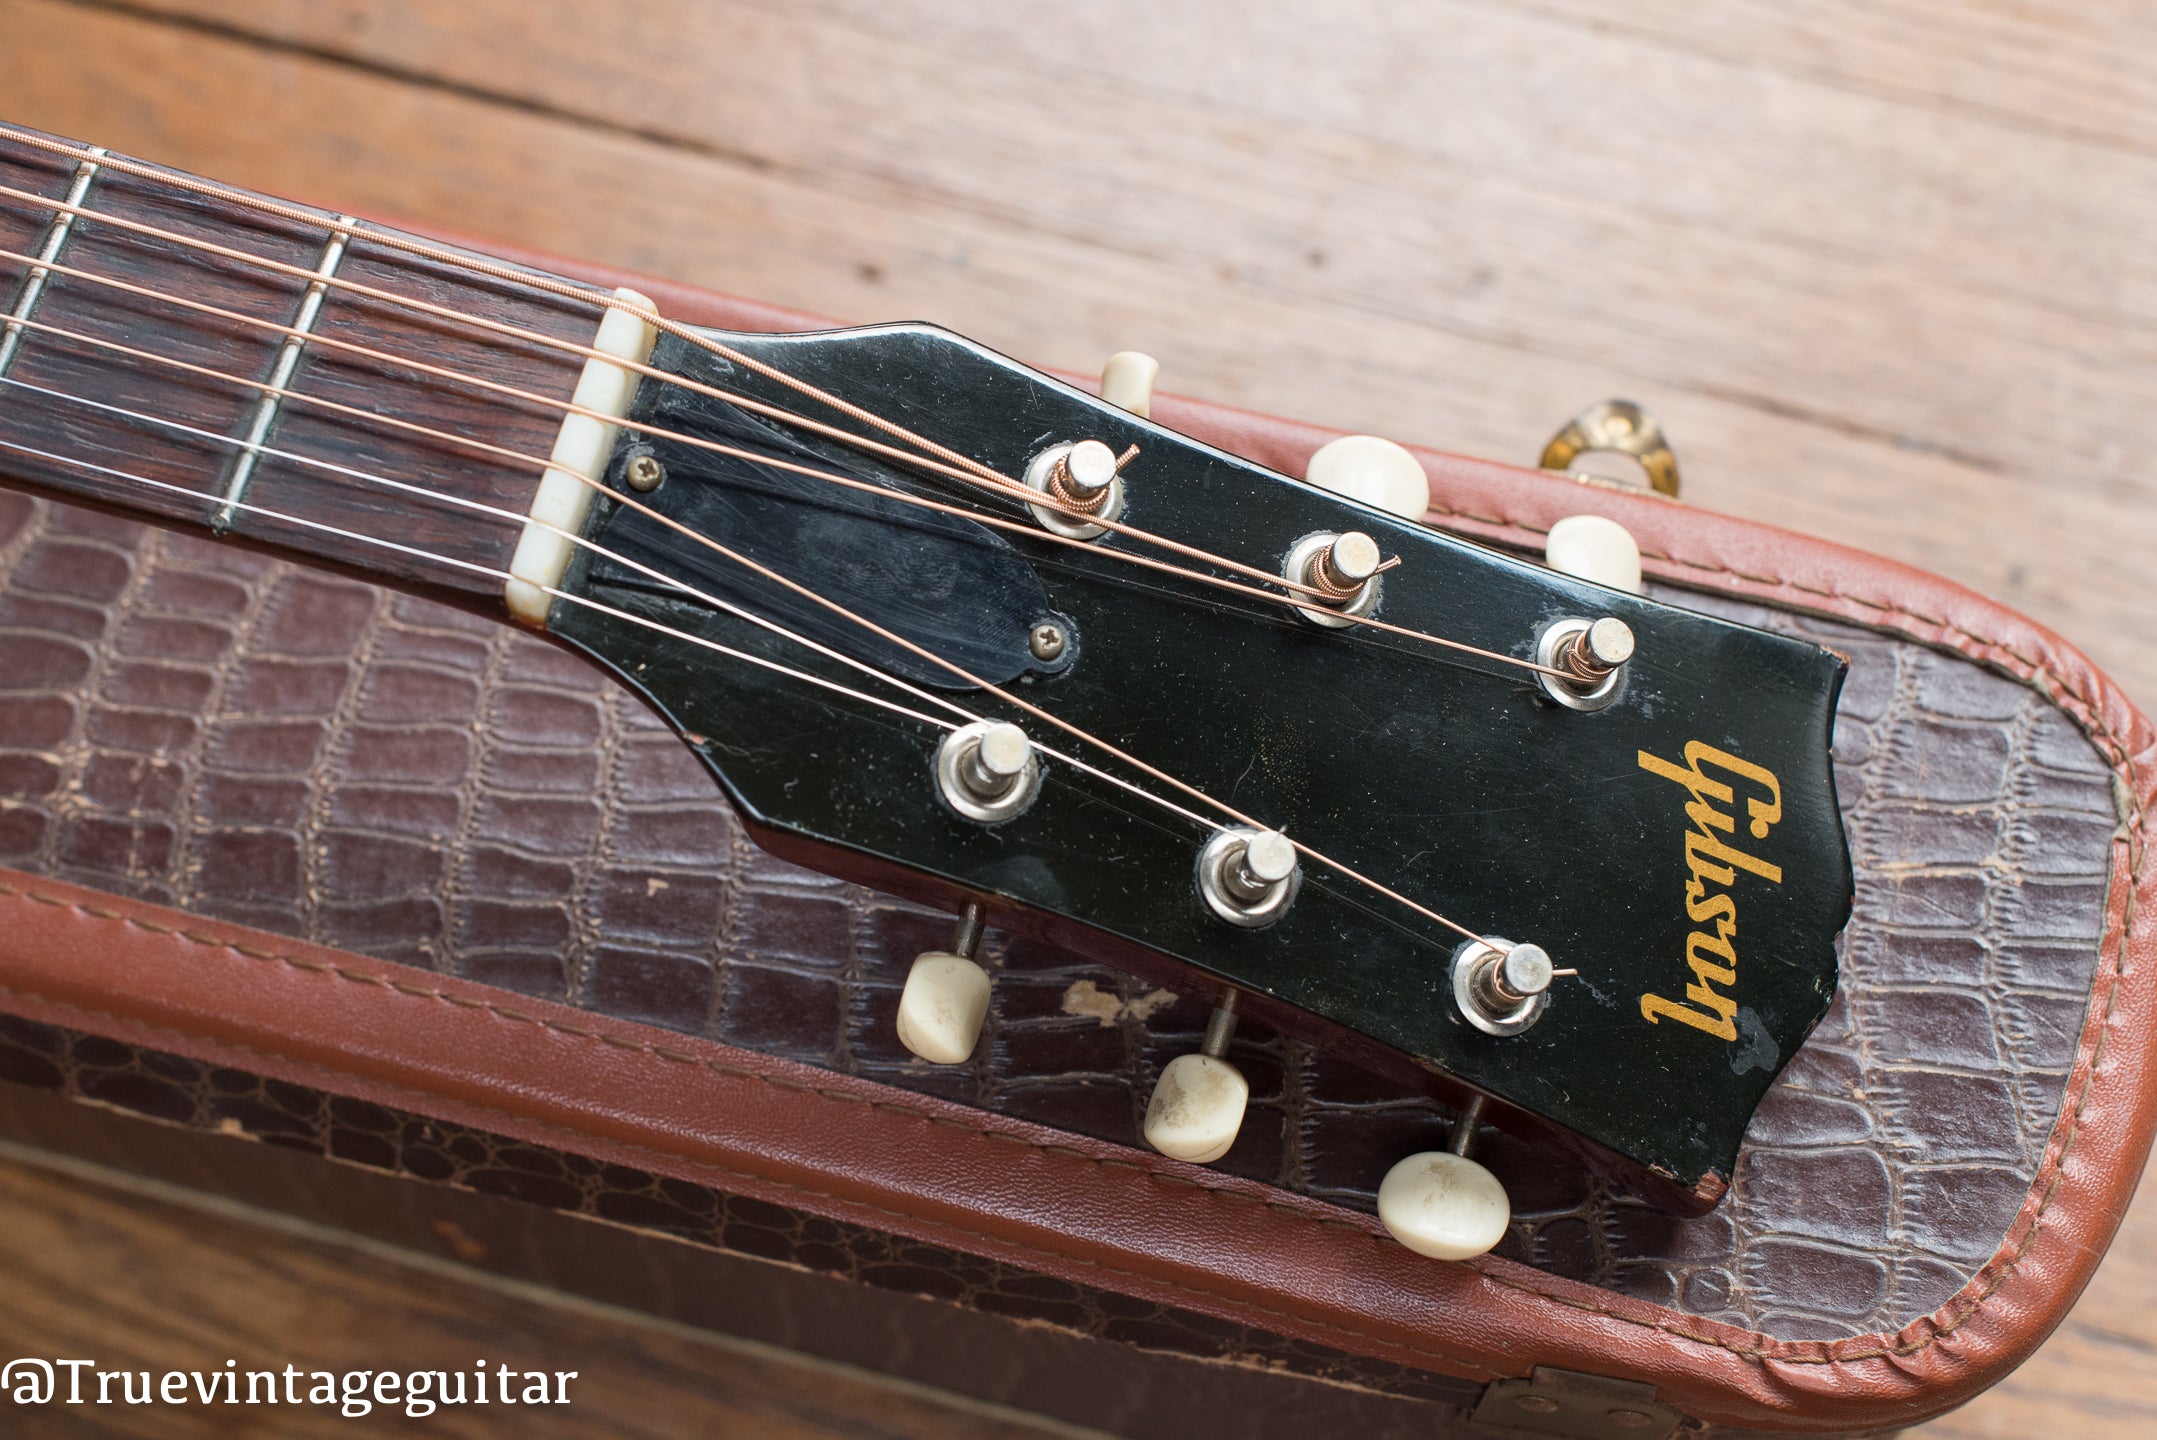 Where to sell vintage Gibson guitars